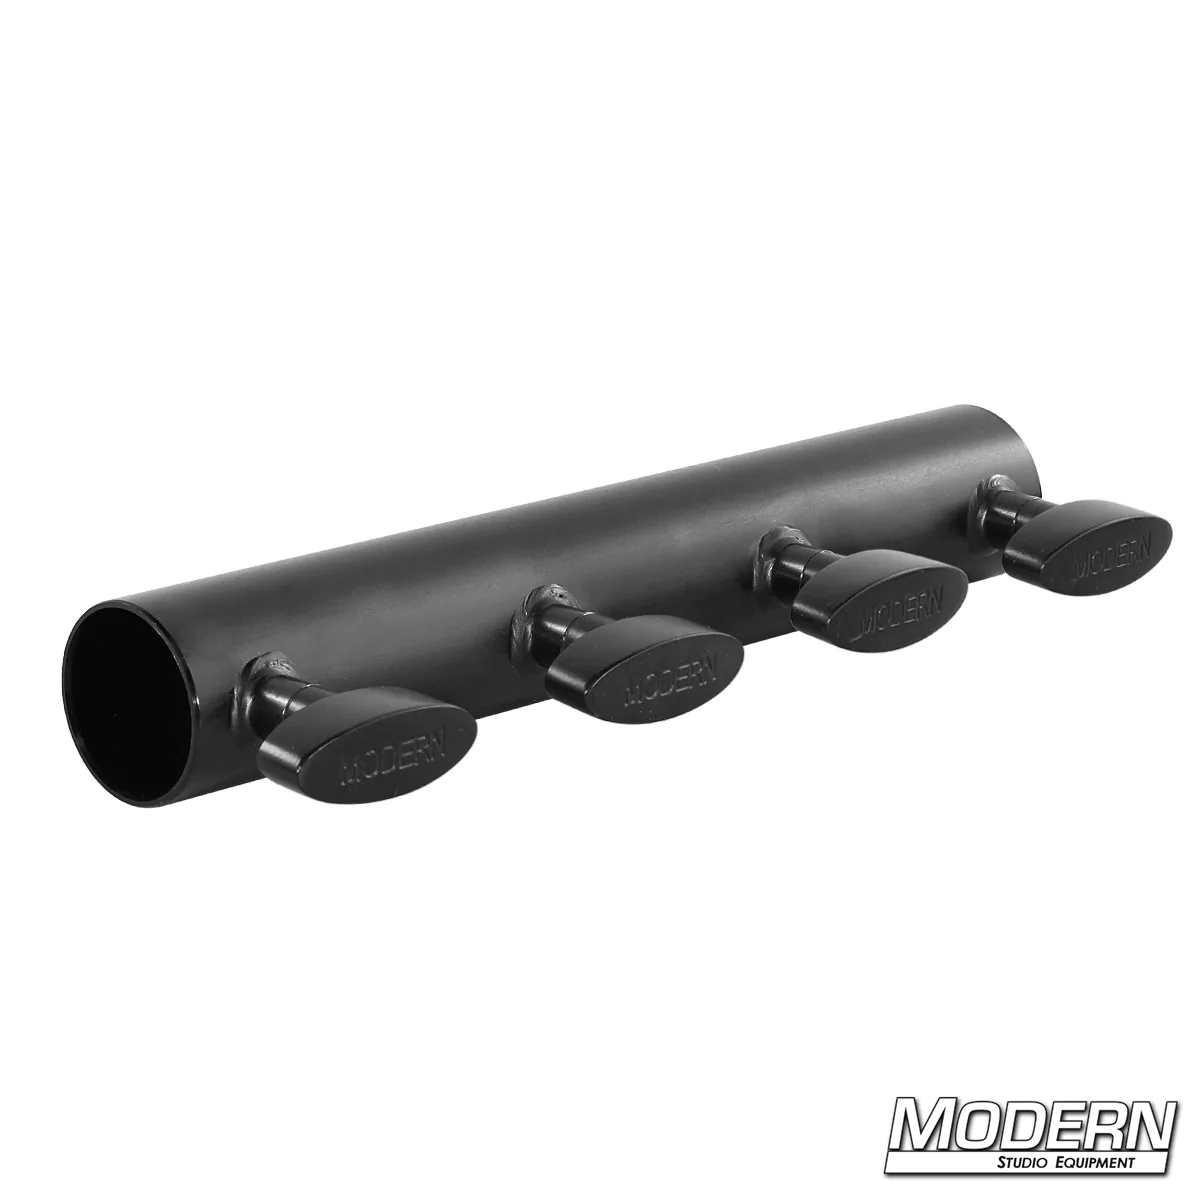 Sleeve for 1-1/4" Speed-Rail® - Black Zinc with T-Handles